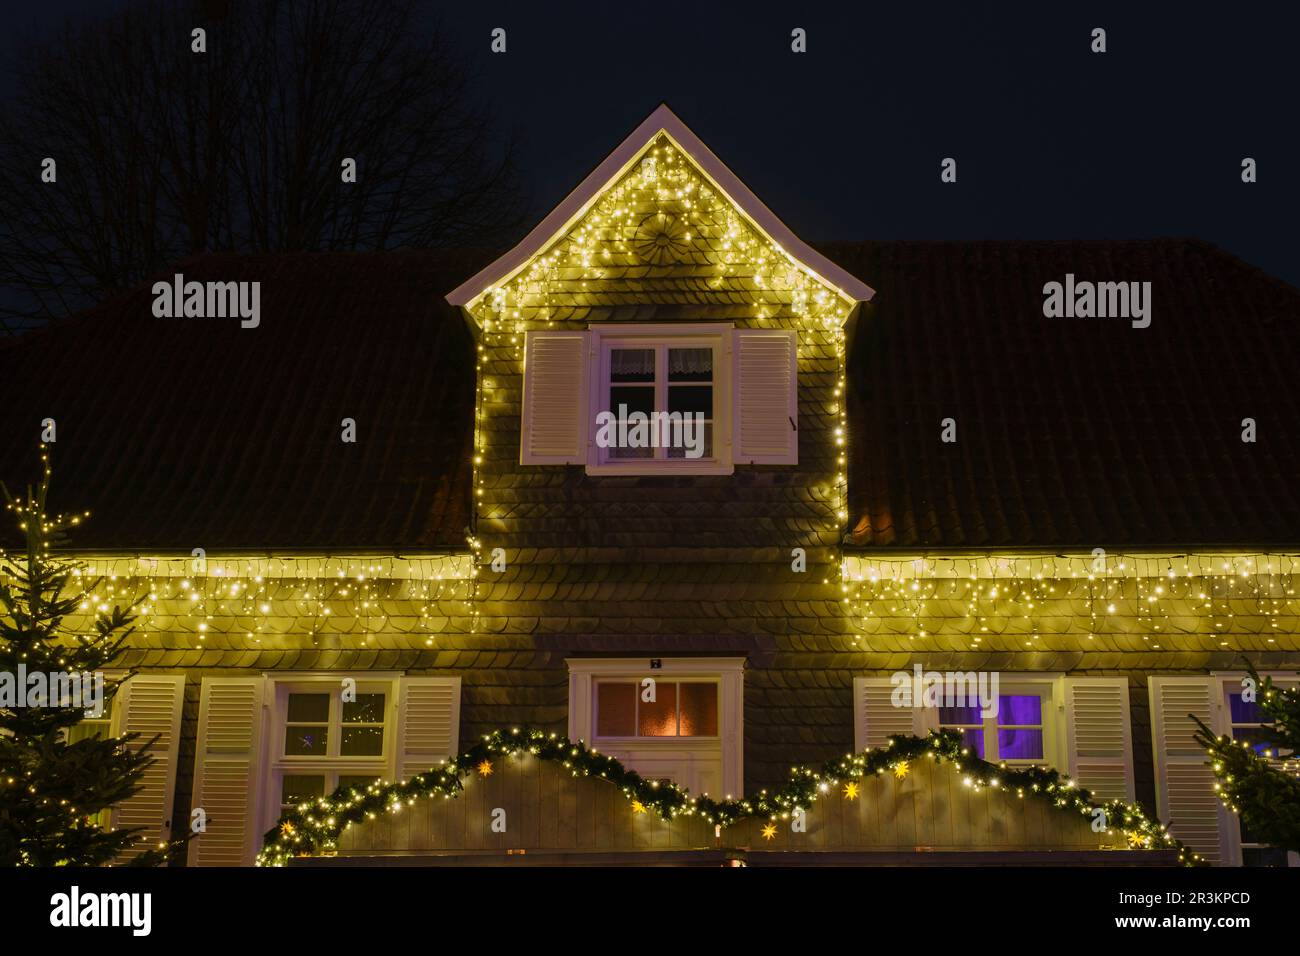 House with Christmas decoration Stock Photo